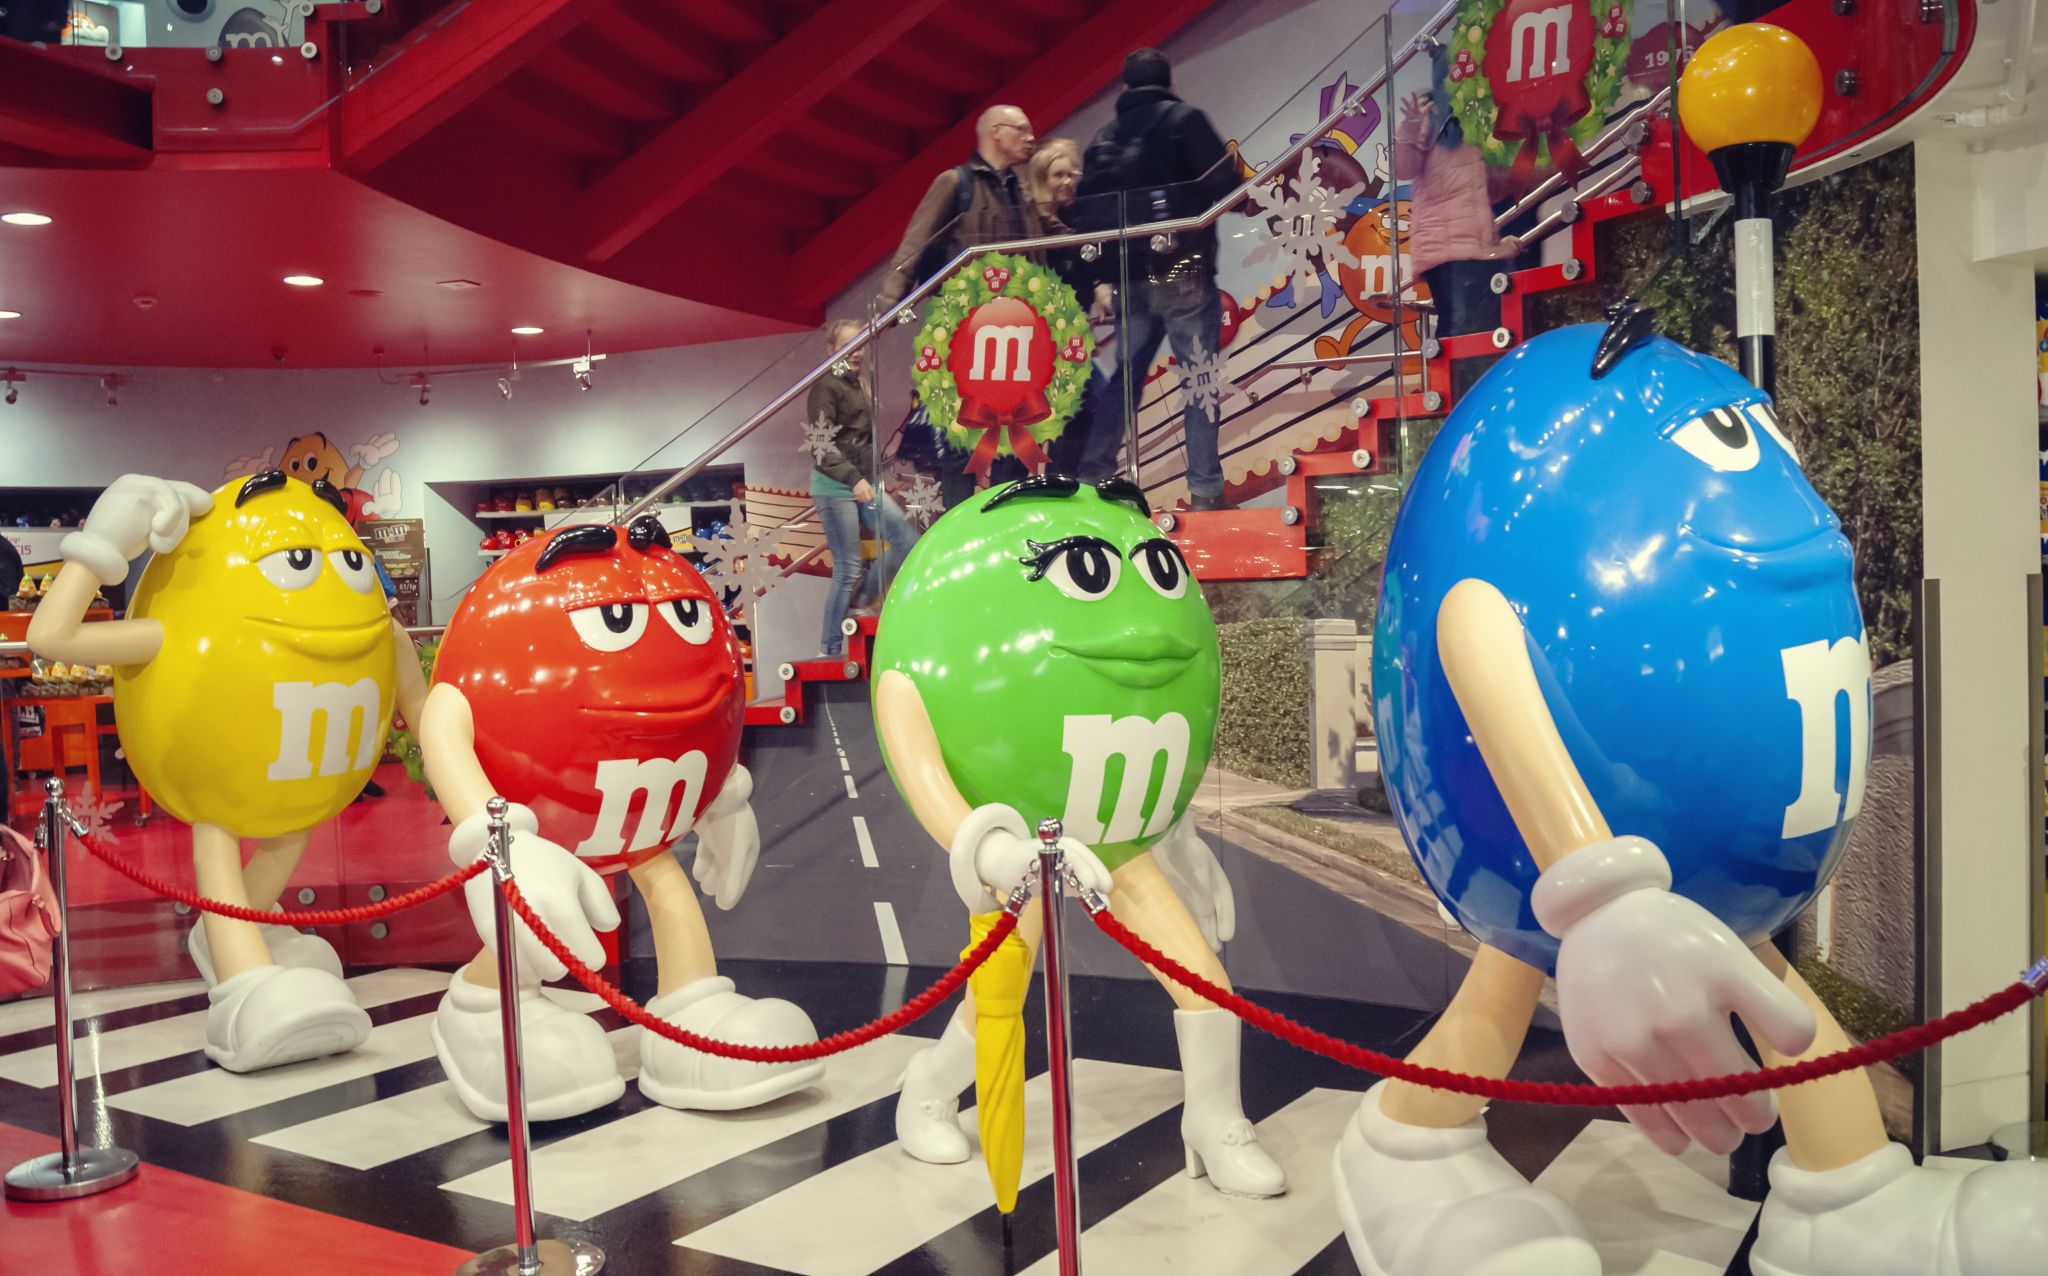 Step Inside the Amazing M&M's World Store in London's Leicester